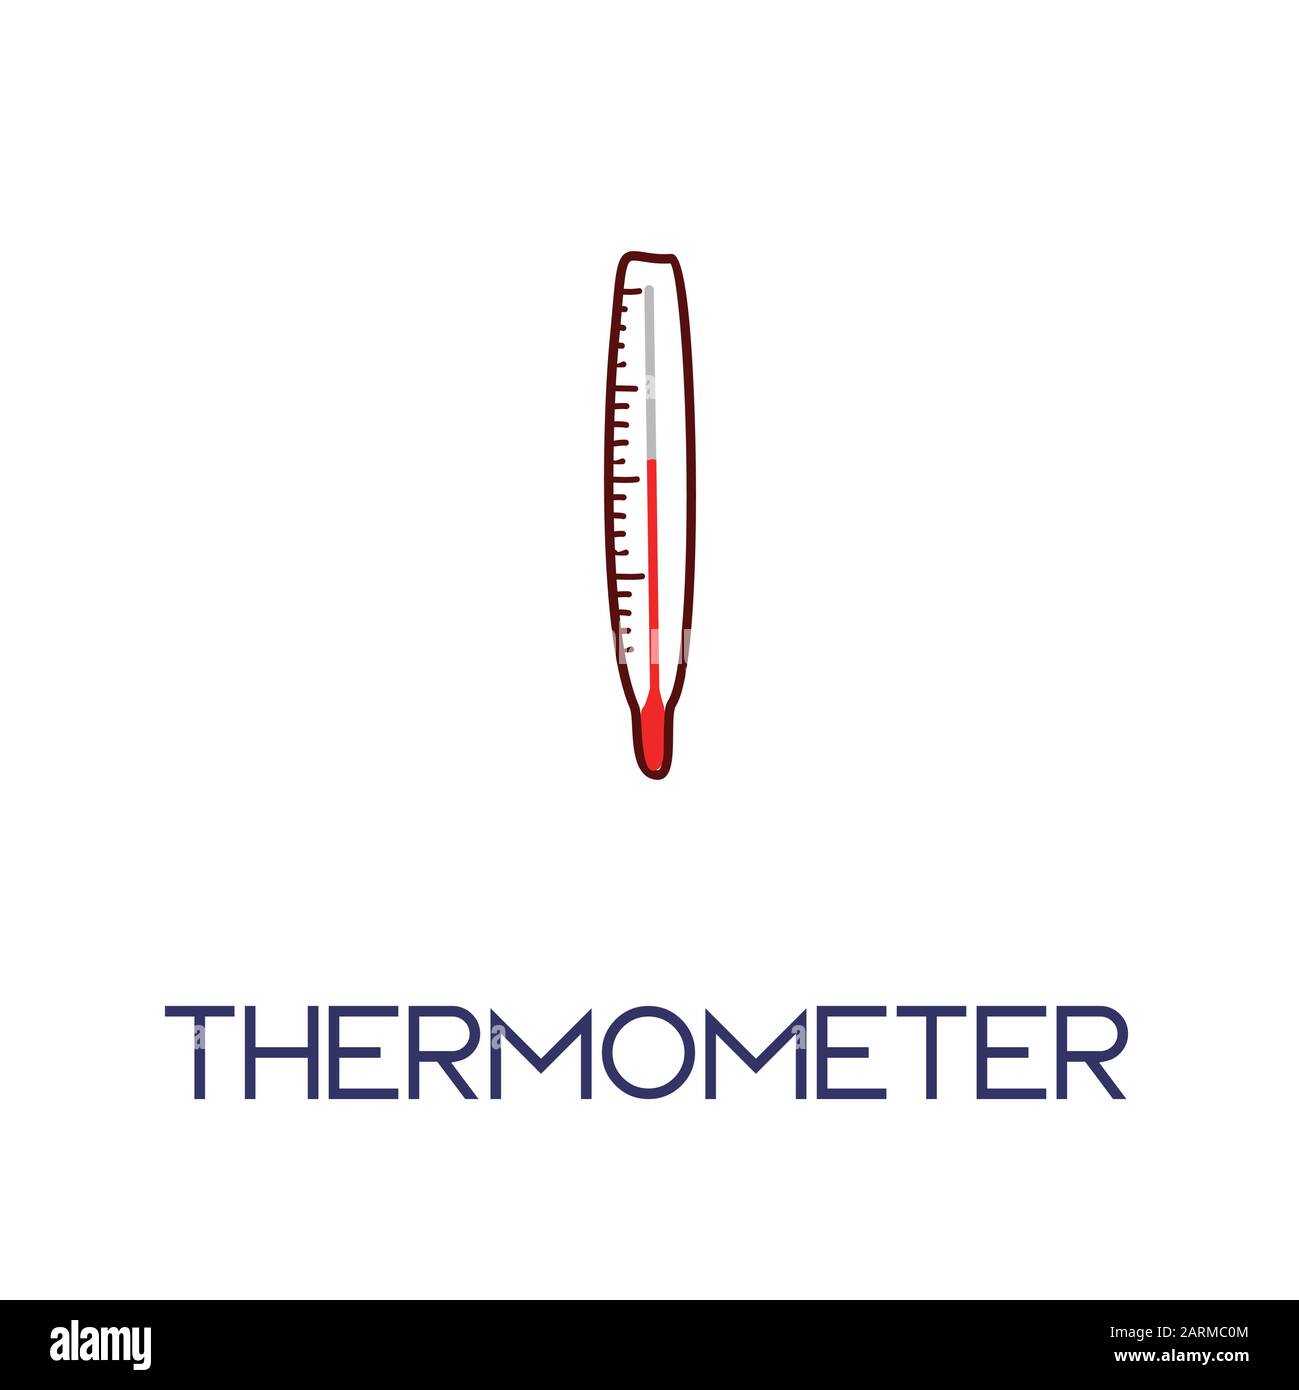 thermometer minimalist out line hand drawn medic flat icon illustration Stock Vector